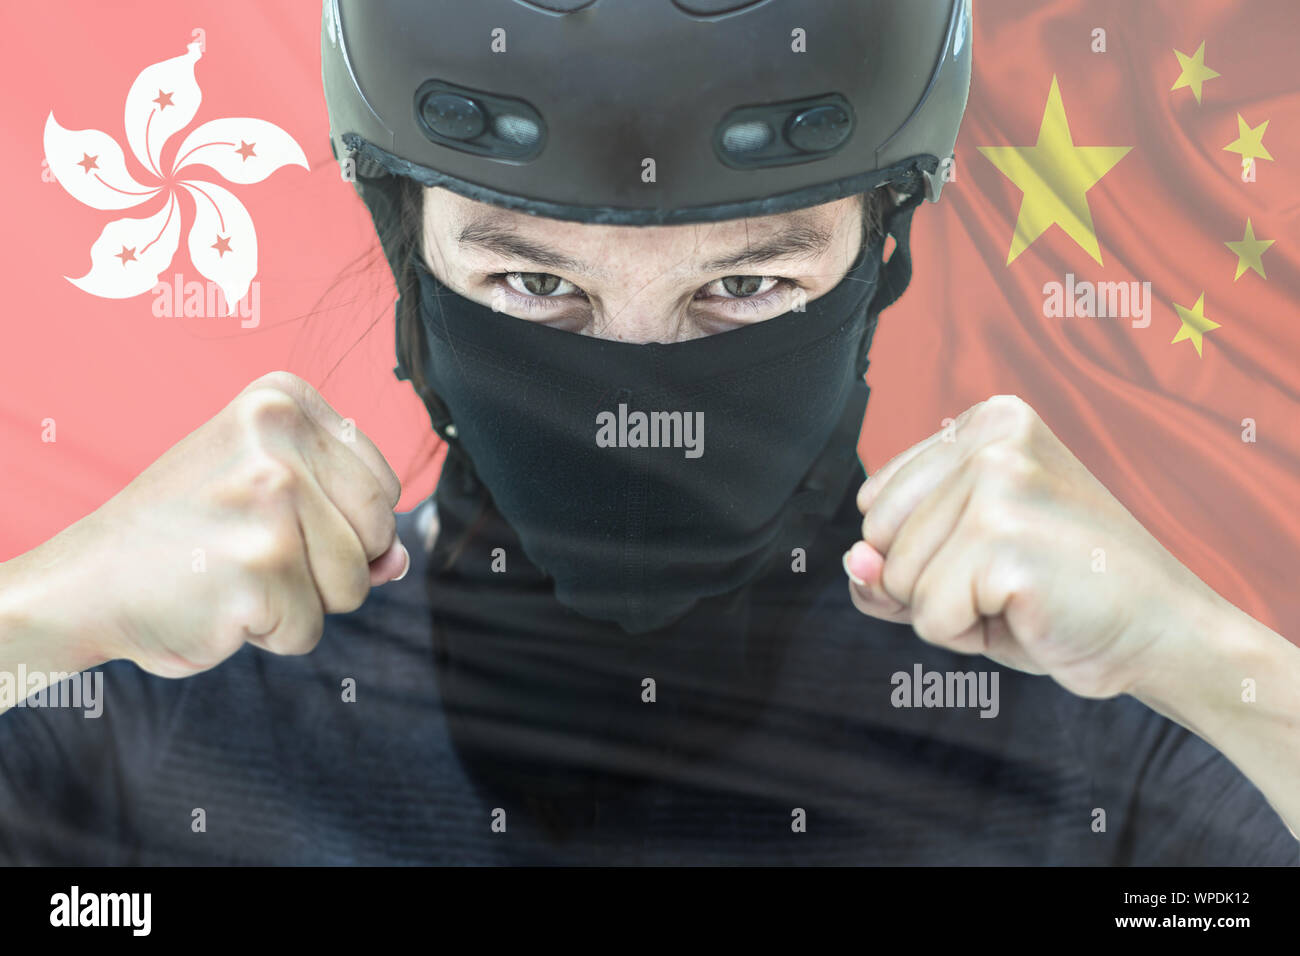 A portrait of a protestor in riot gear with the hong kong and chinese flags in the background Stock Photo